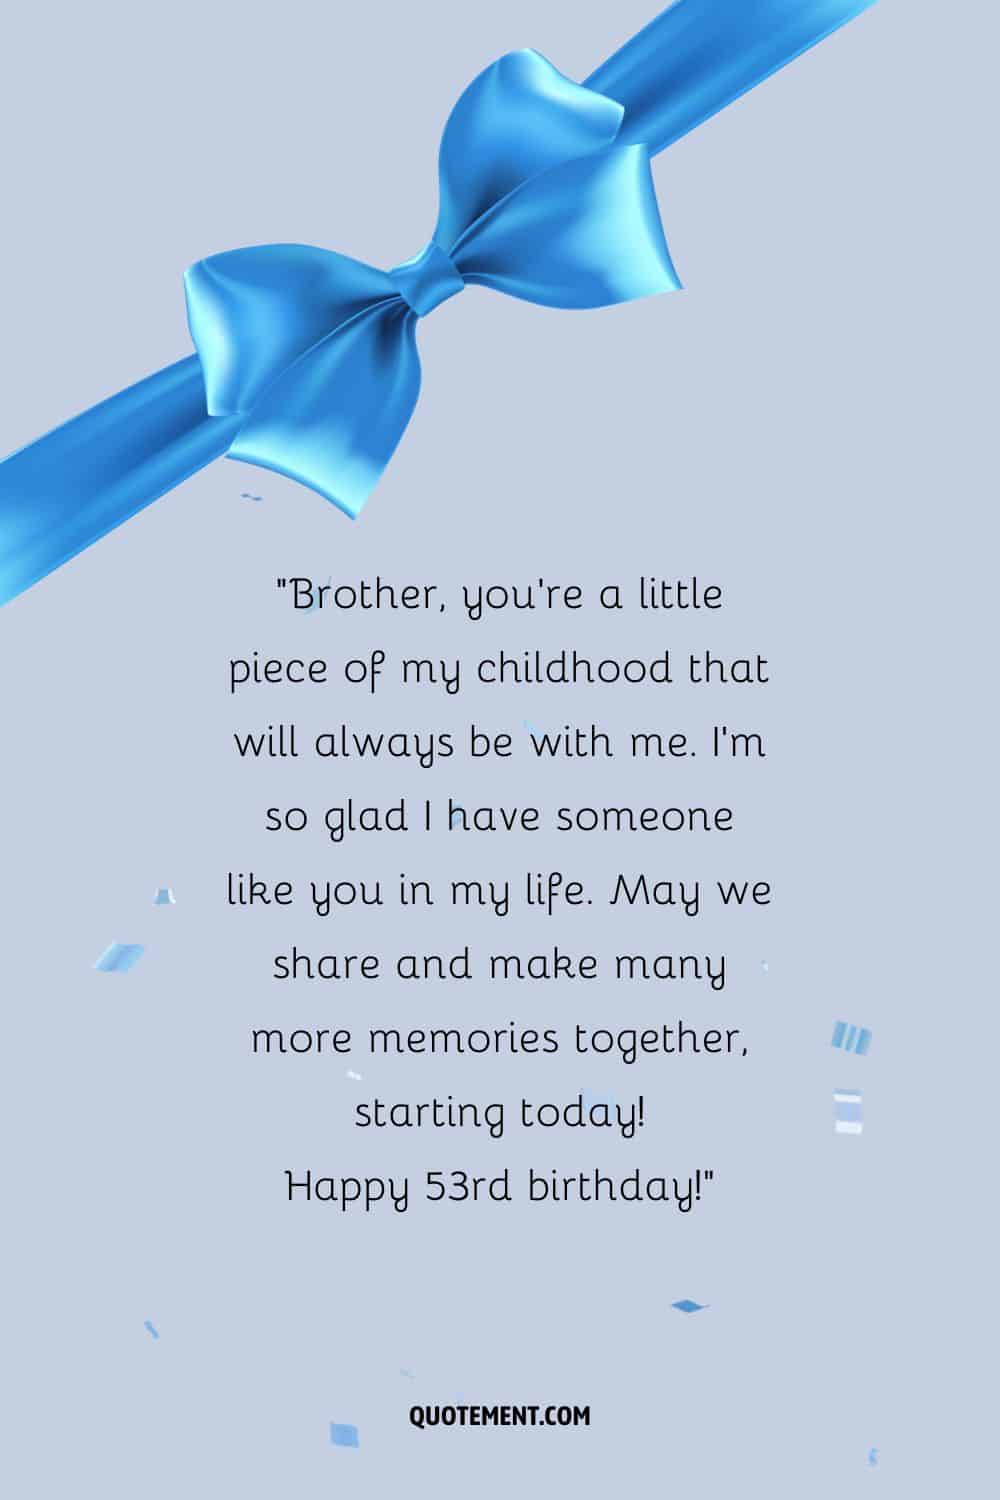 Heartfelt message for a brother's 53rd birthday, a blue ribbon and confetti